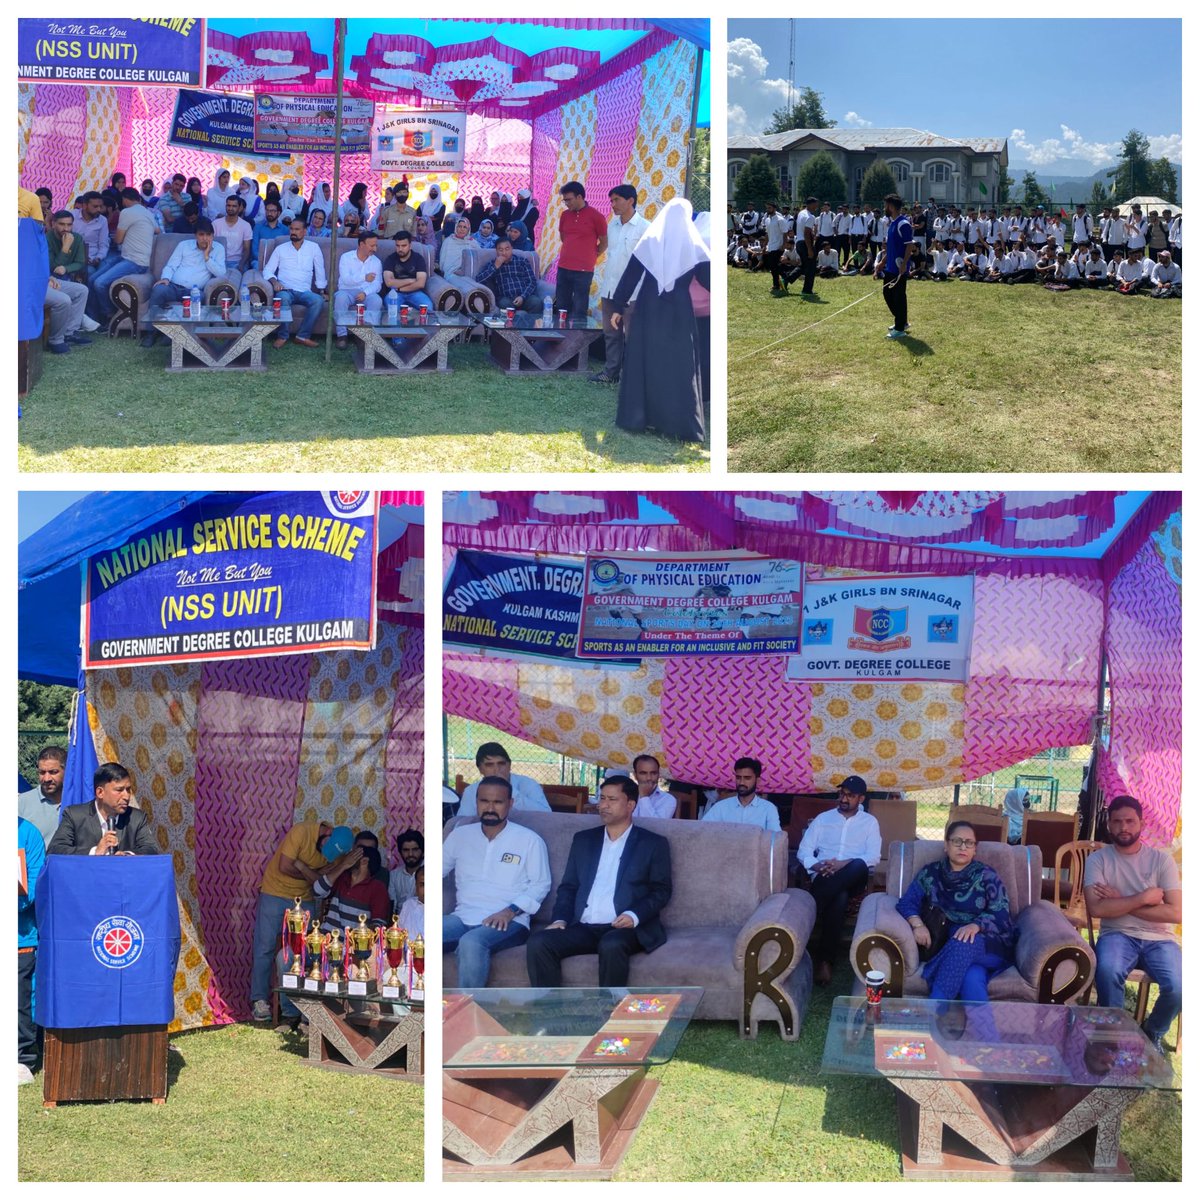 GDC Kulgam Sports Extravaganza a grand success!
Students participated in a variety of sports, including javelin, shot put, discus, and cricket. The event was a celebration of determination, camaraderie, and sportsmanship. #GDCkulgam #SportsExtravaganza #NationalSportsDay